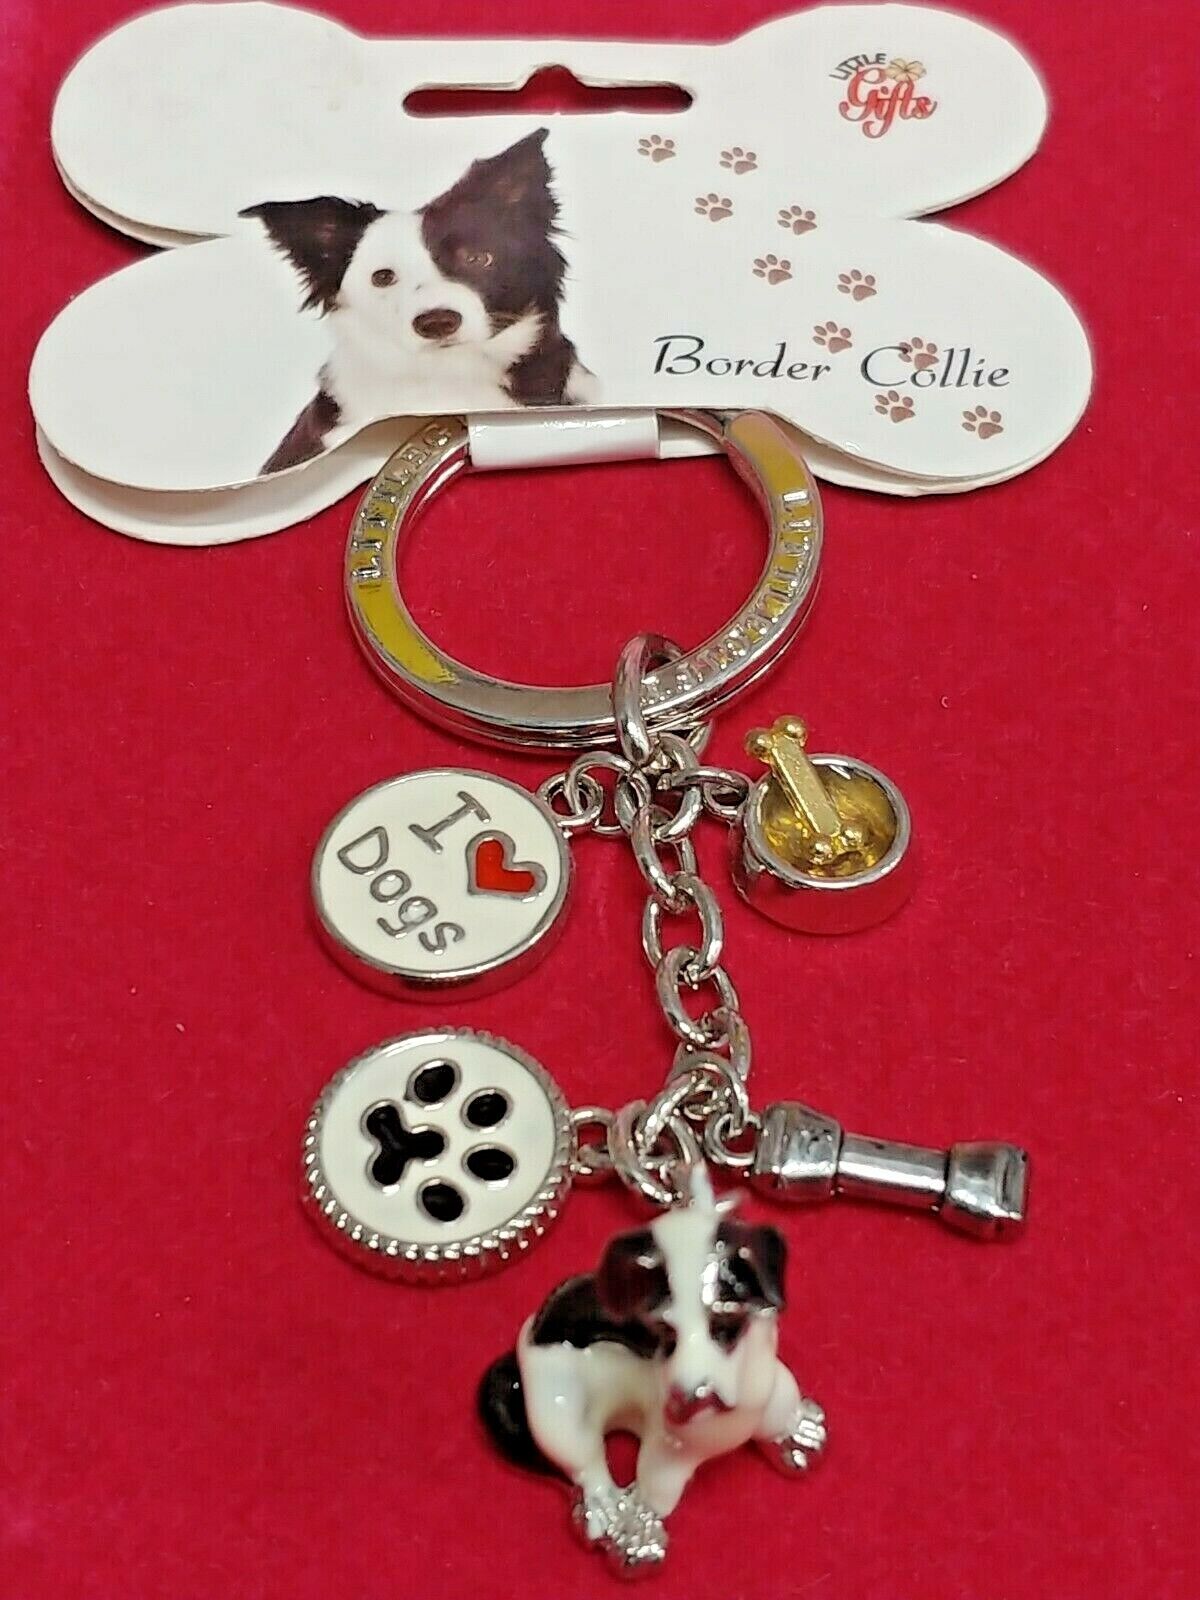 Little Gifts Border Collie Dog Breed Figurine Keychain W/ Charms Pewter Enamel 